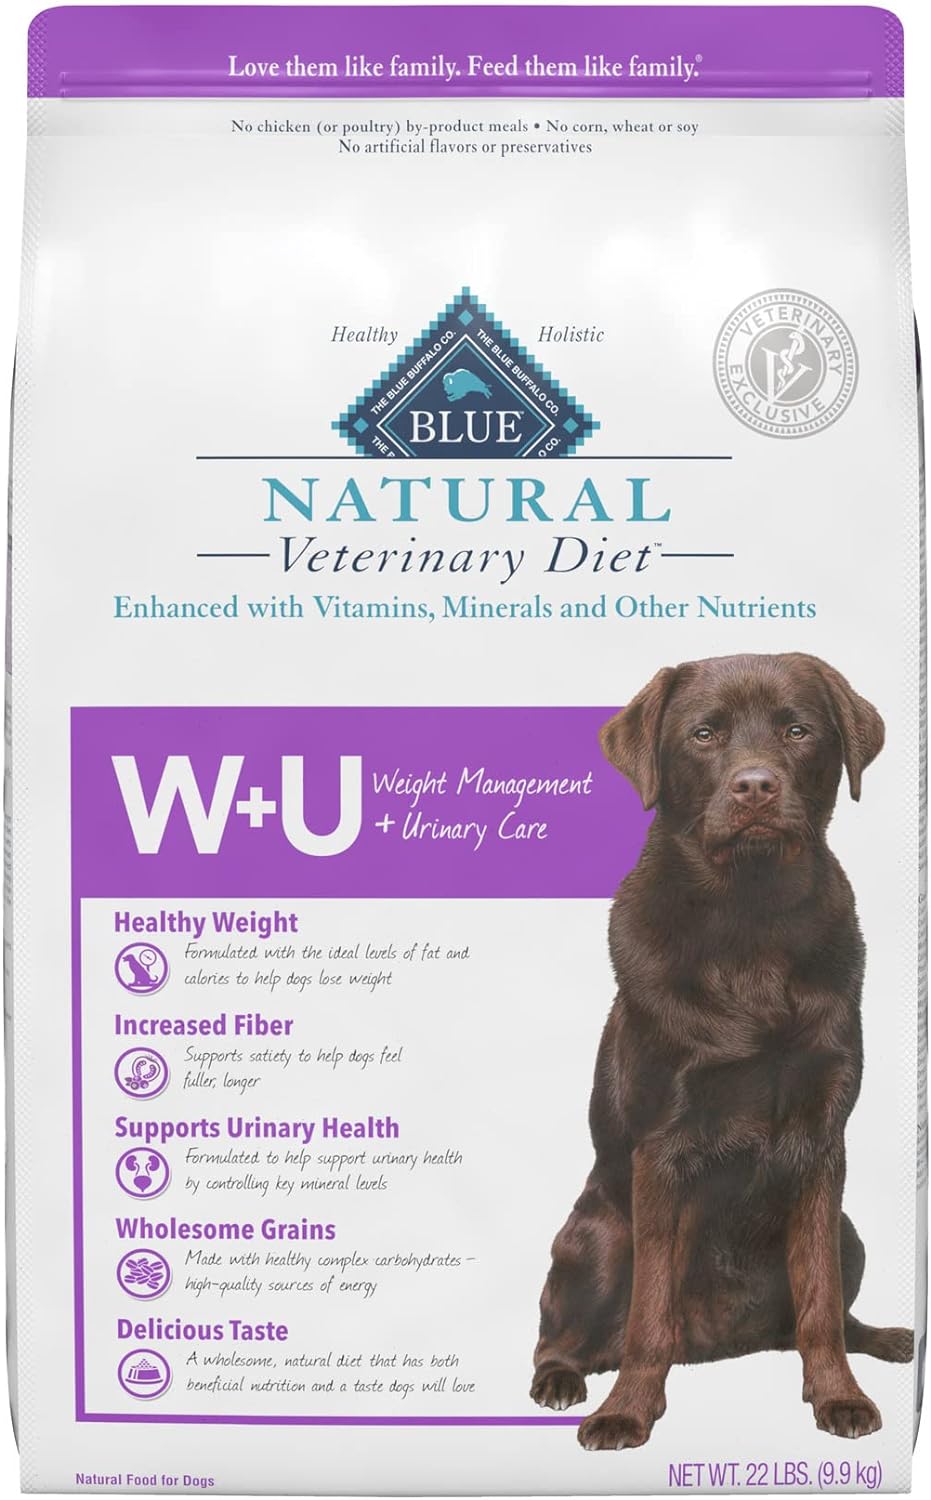 Blue Natural Veterinary Diet W+U Weight Management + Urinary Care Dry Dog Food – Gallery Image 1